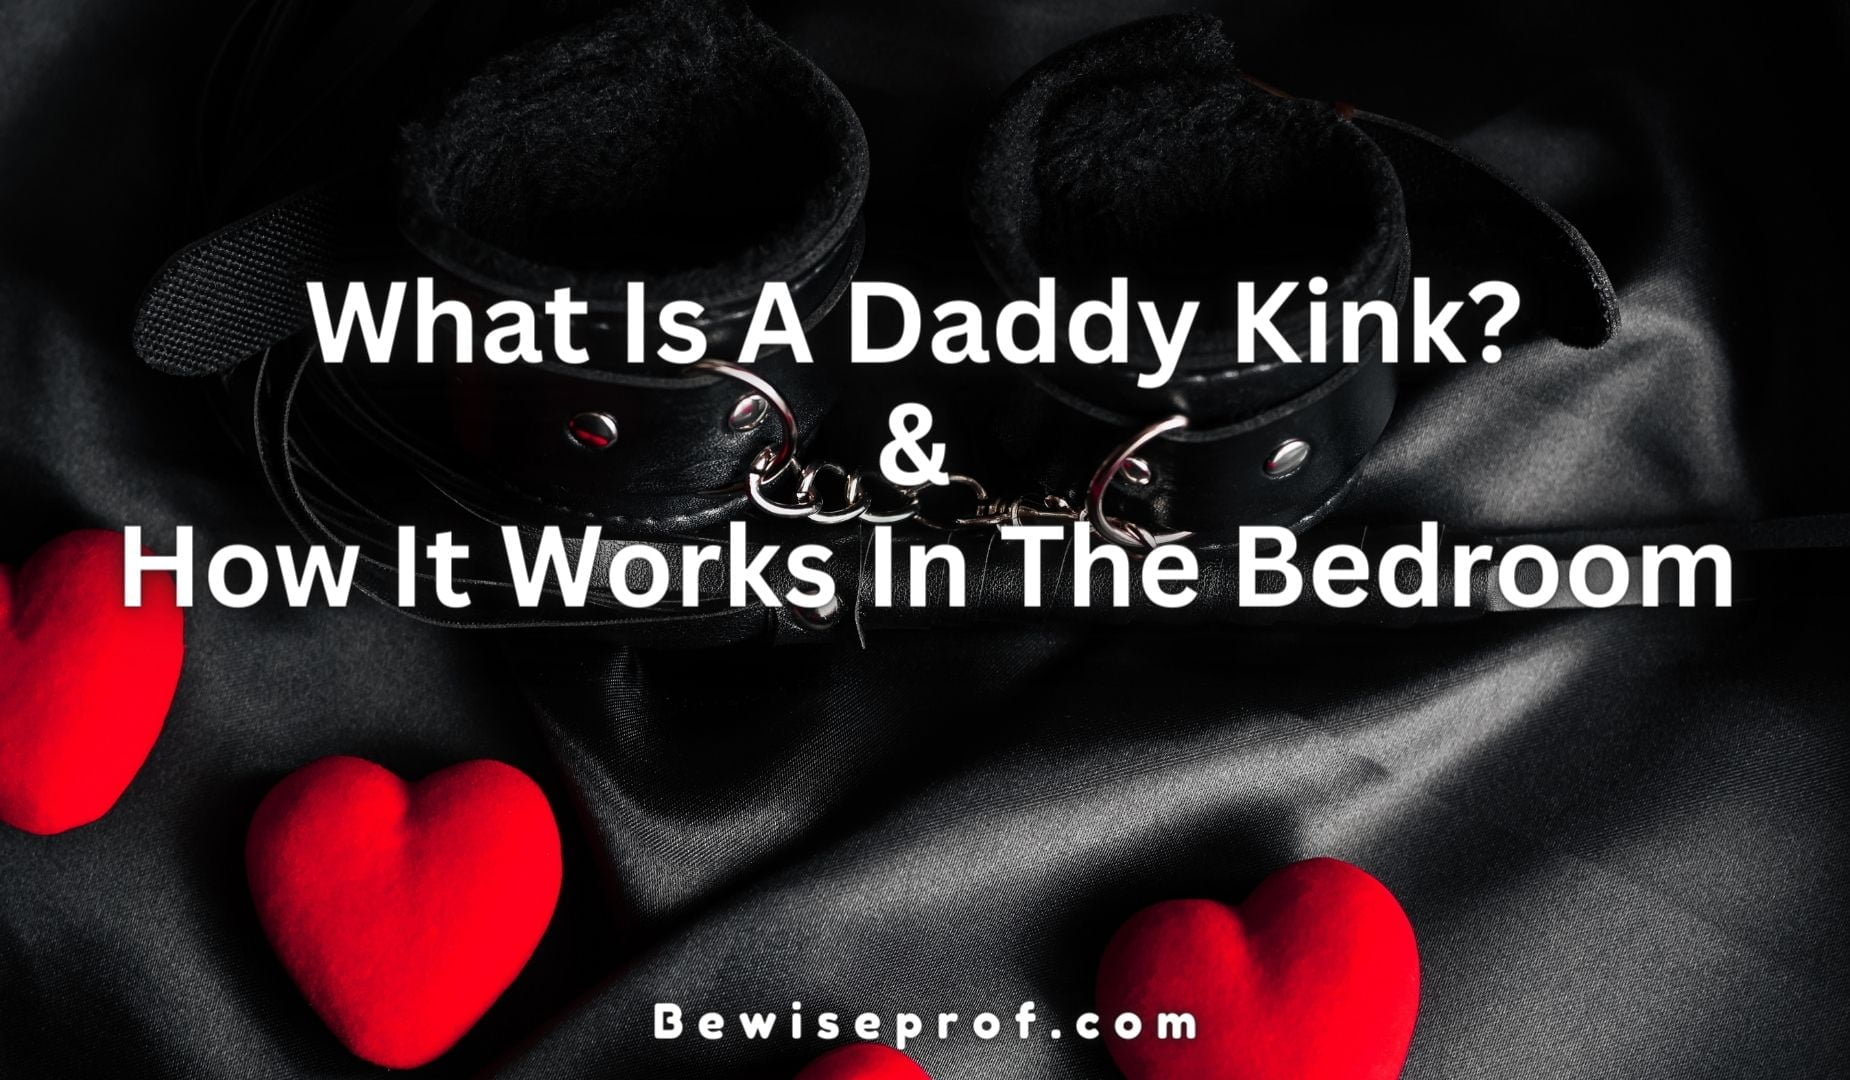 What Is A Daddy Kink? & How It Works In The Bedroom